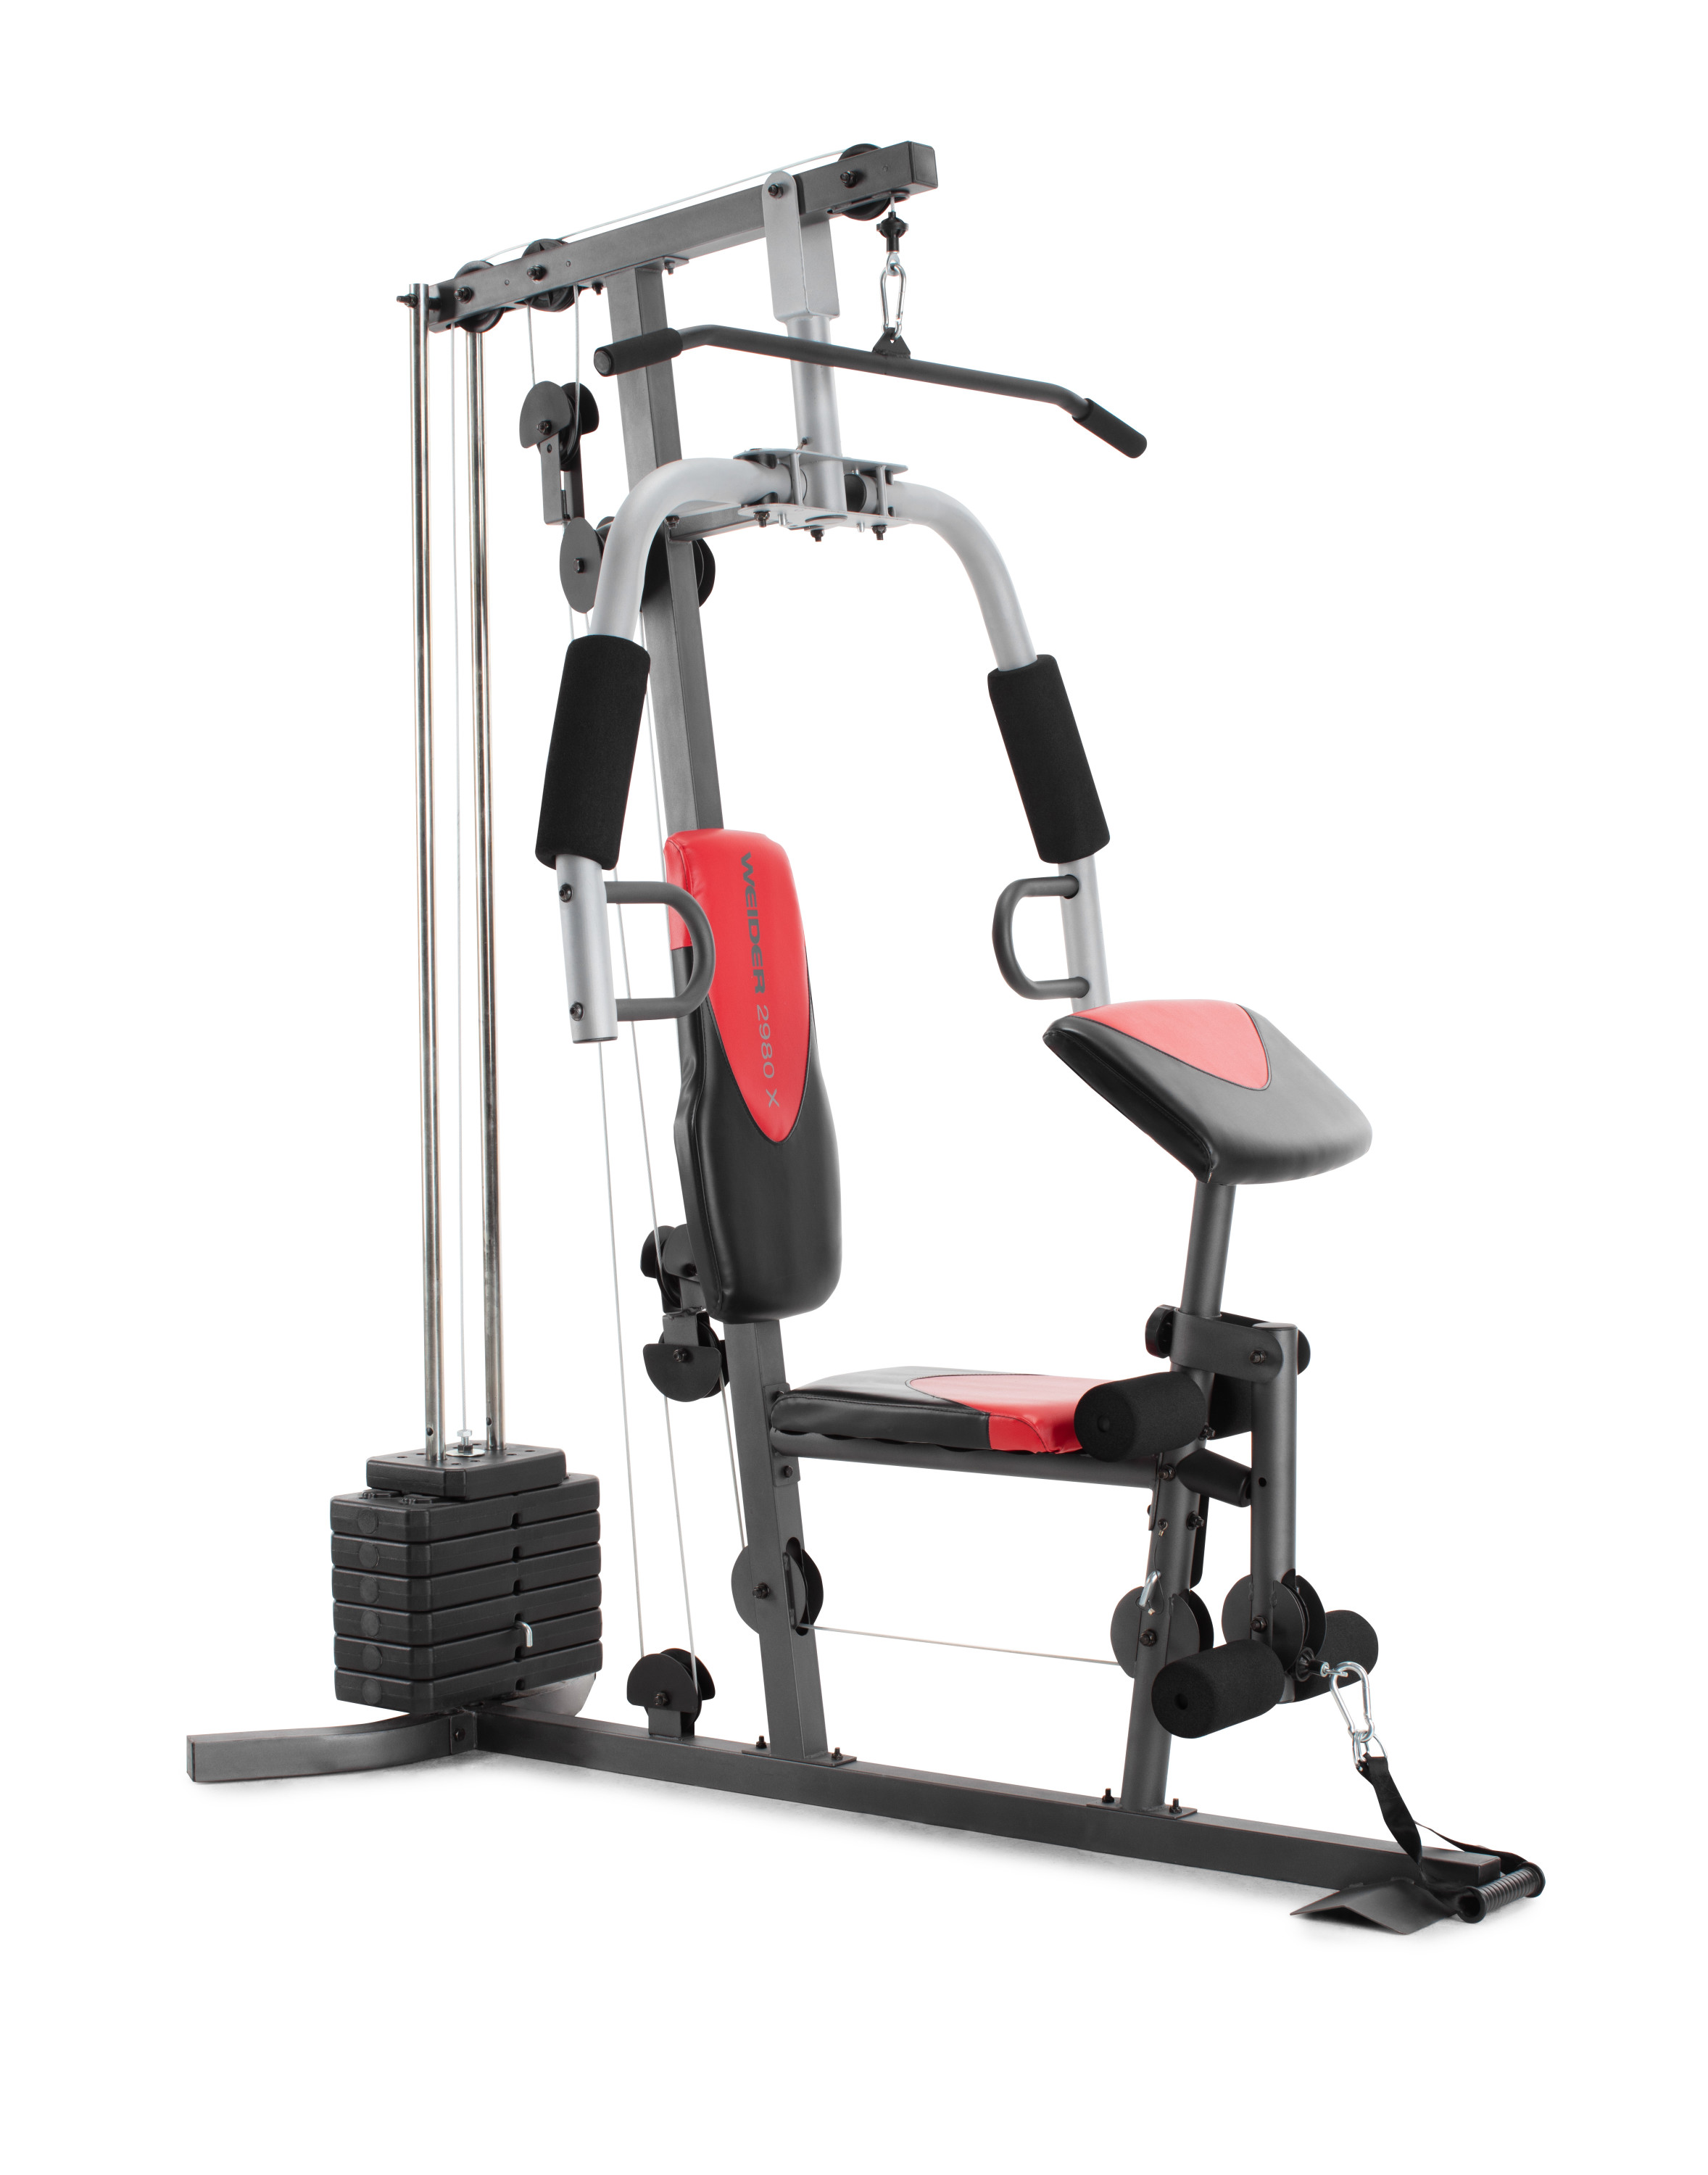 Weider 2980 X Home Gym with 80lb Vinyl Weight Stack - image 4 of 17